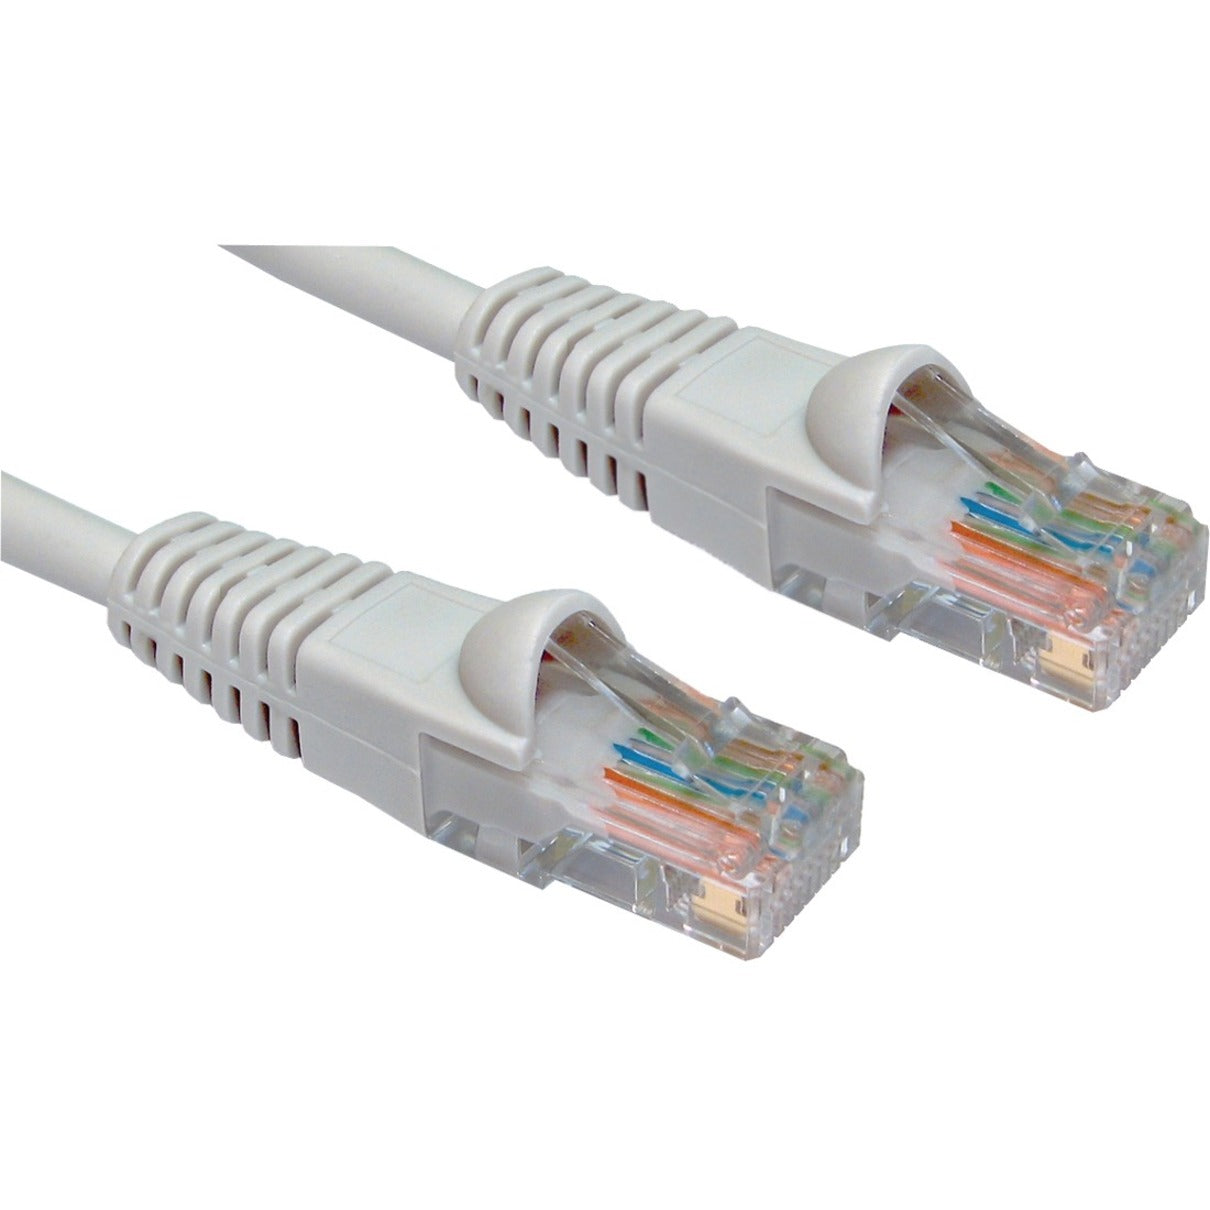 W Box 0E-C6GY56 Cat.6 Patch Network Cable, 5 ft, Gray, 6 Pack